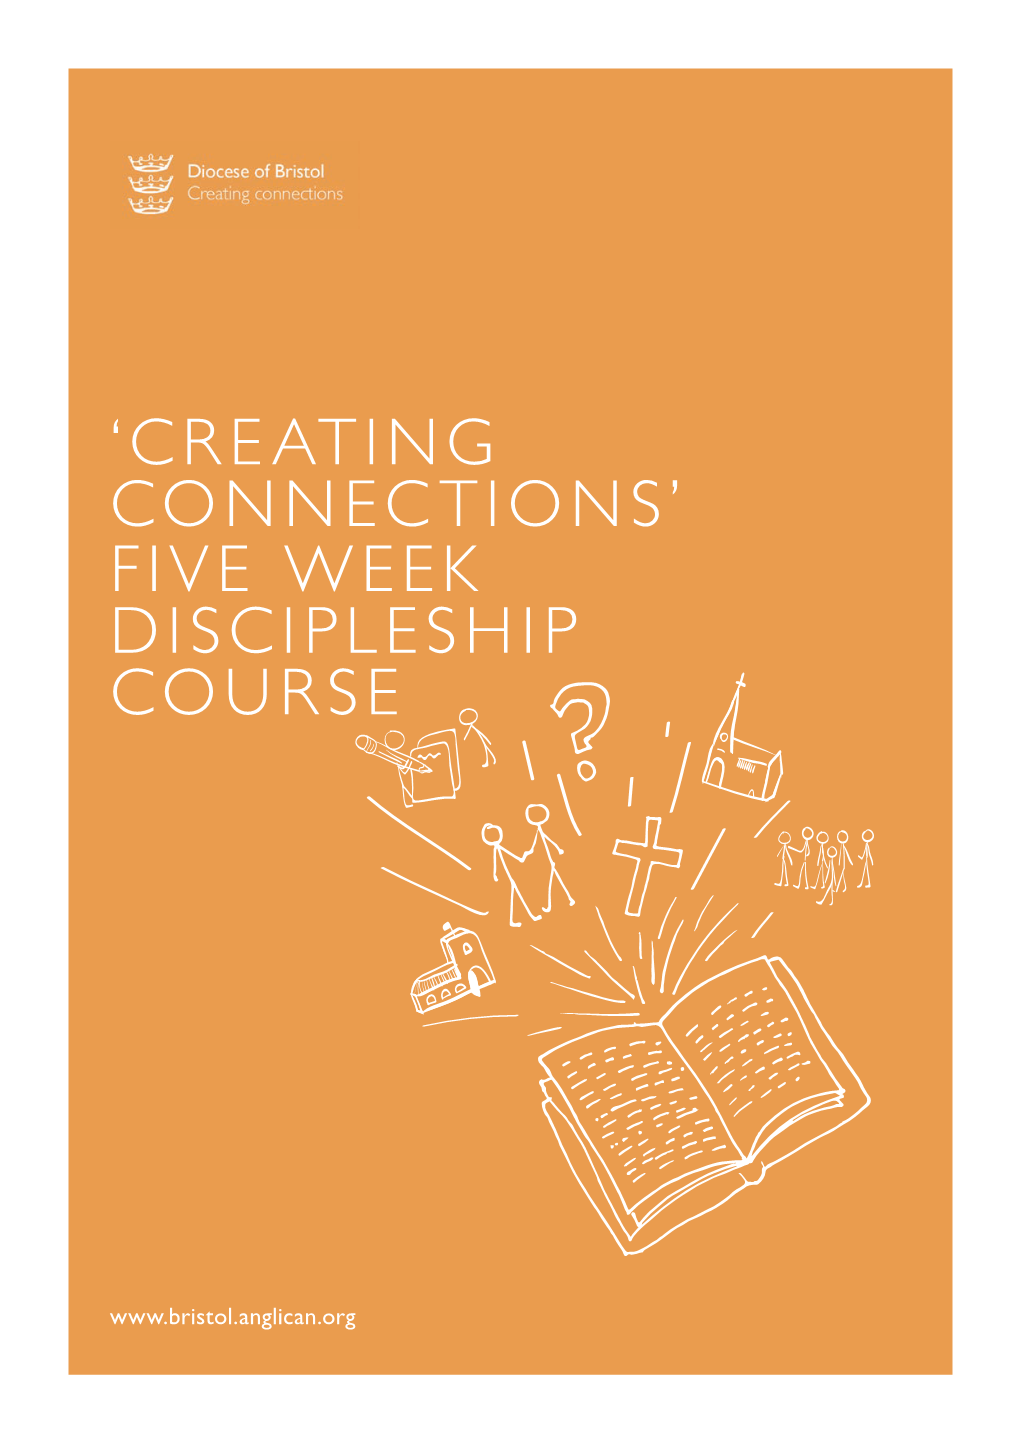 'Creating Connections' Five Week Discipleship Course